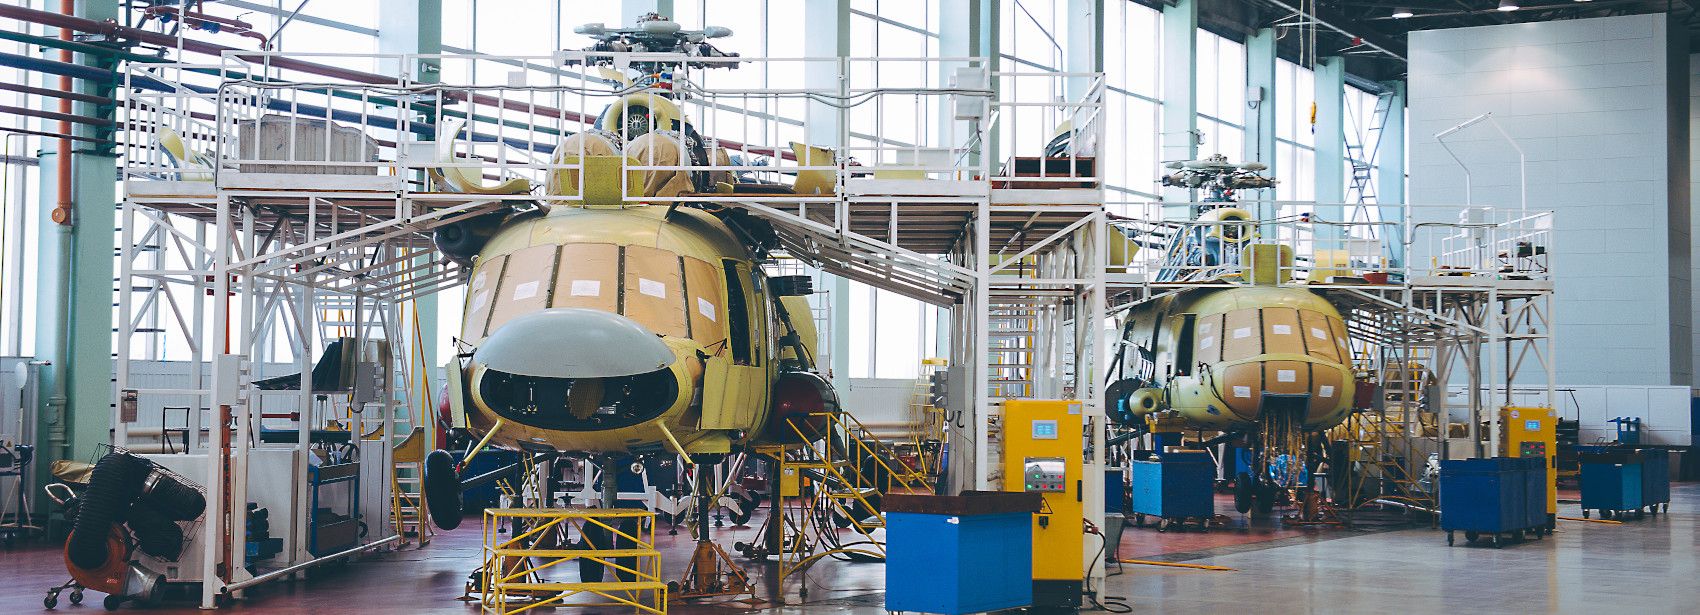 UK Helicopter Manufacturer - Hydraulic Power Pack project header image